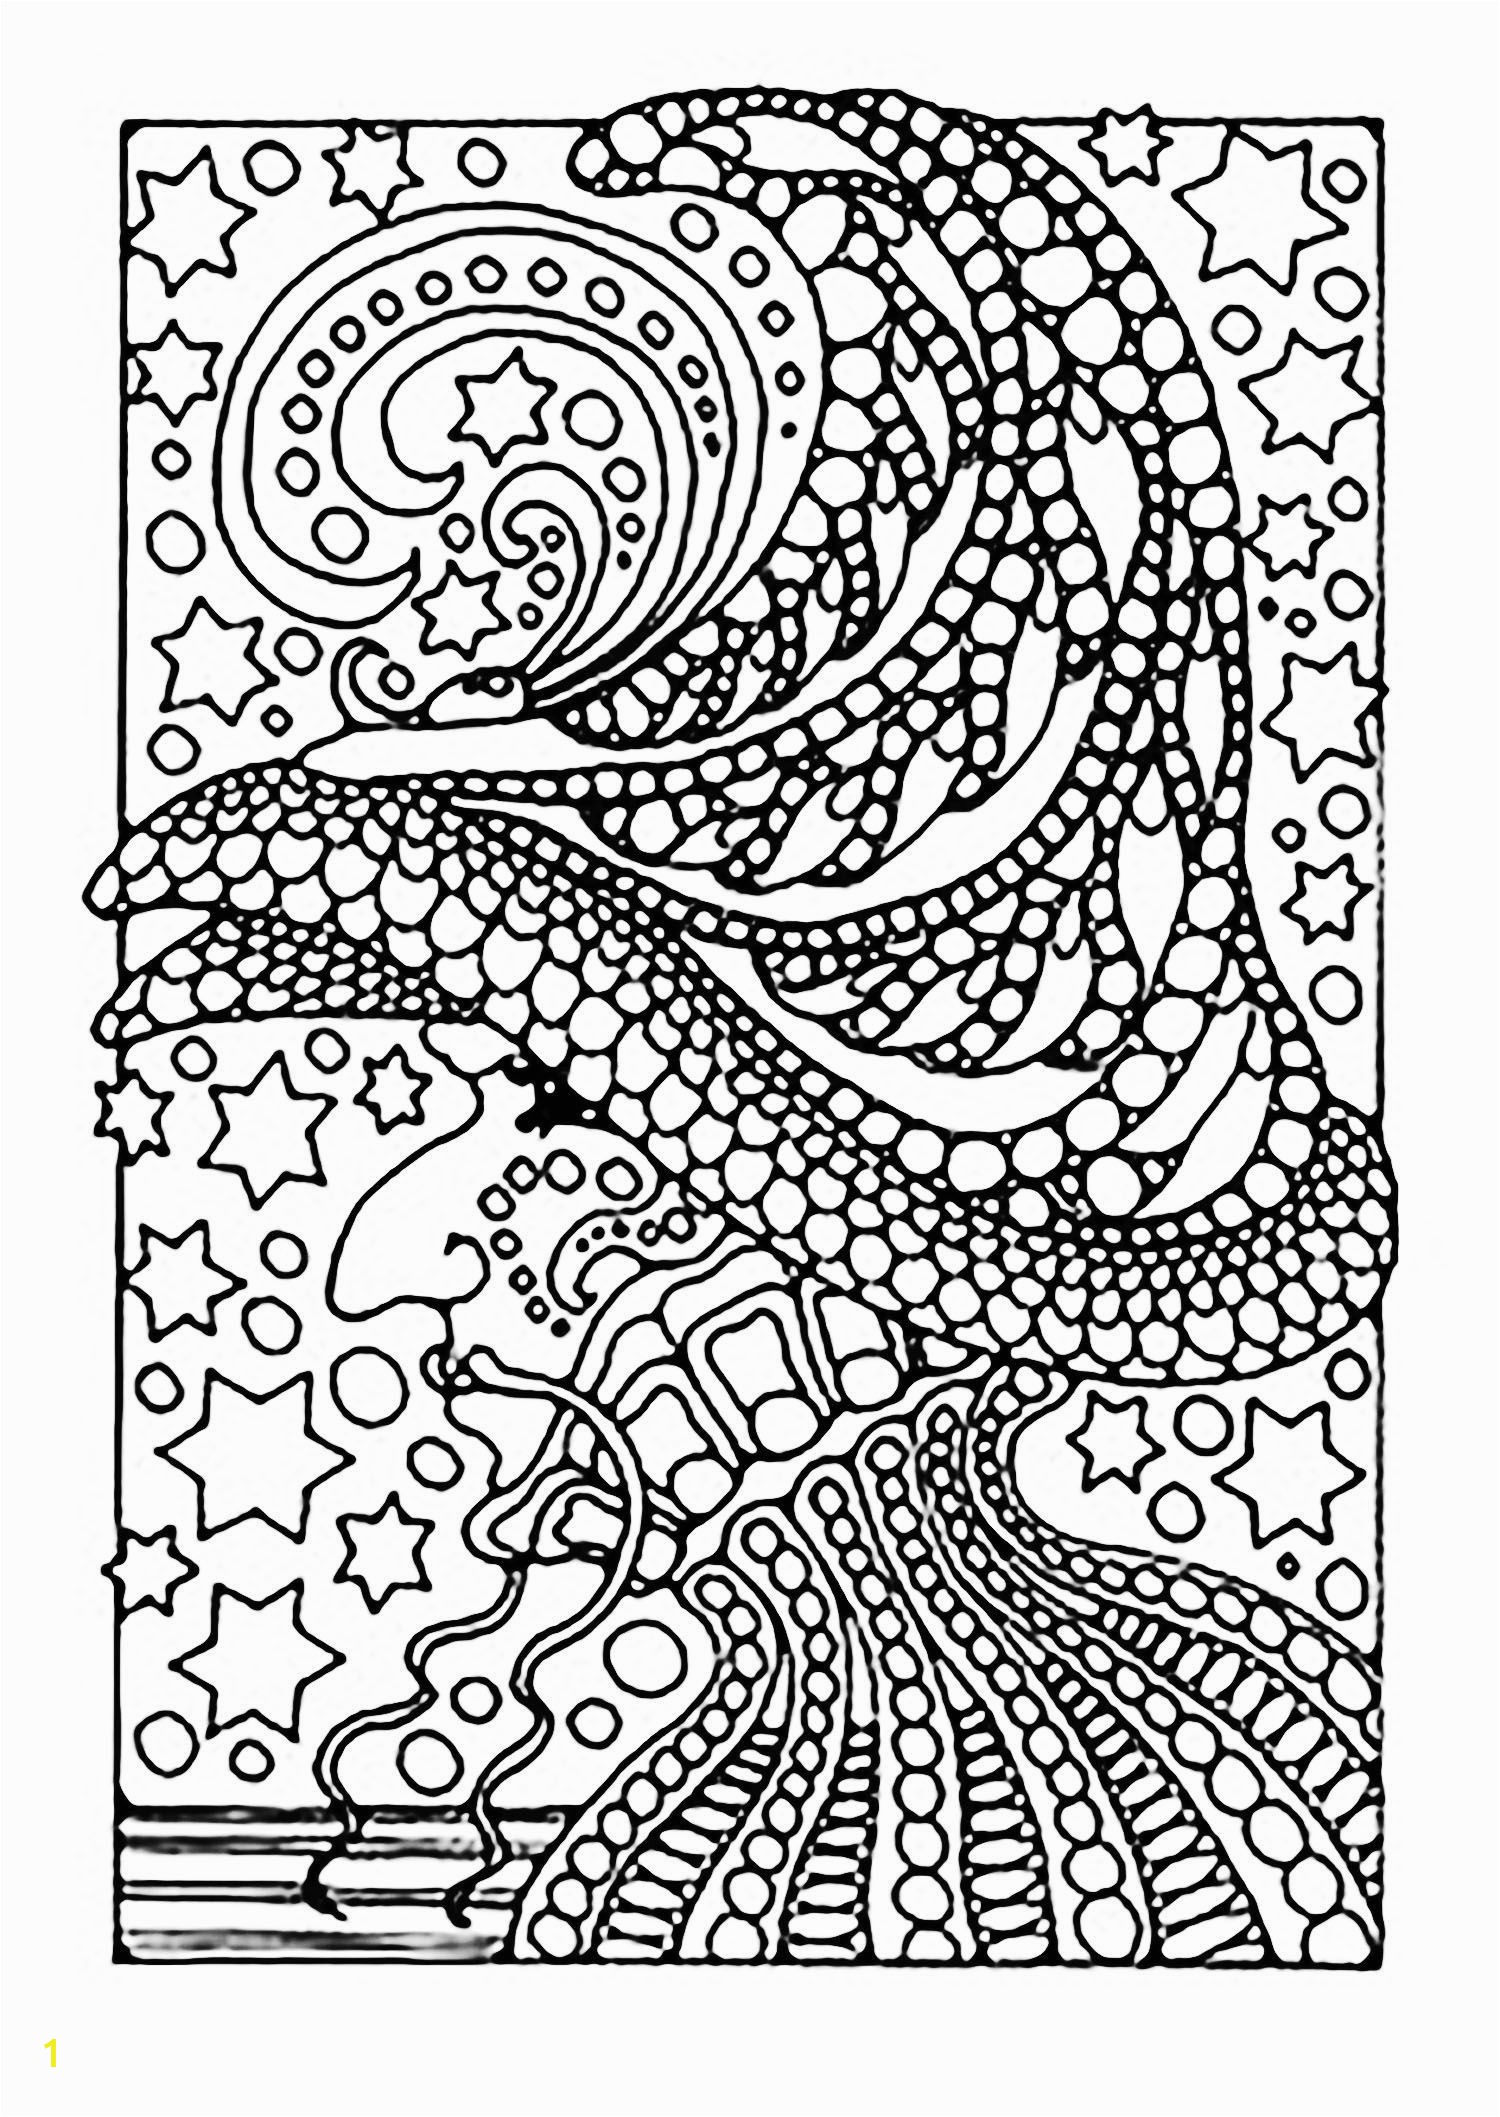 Pileated Woodpecker Coloring Page 14 Best Pileated Woodpecker Coloring Page